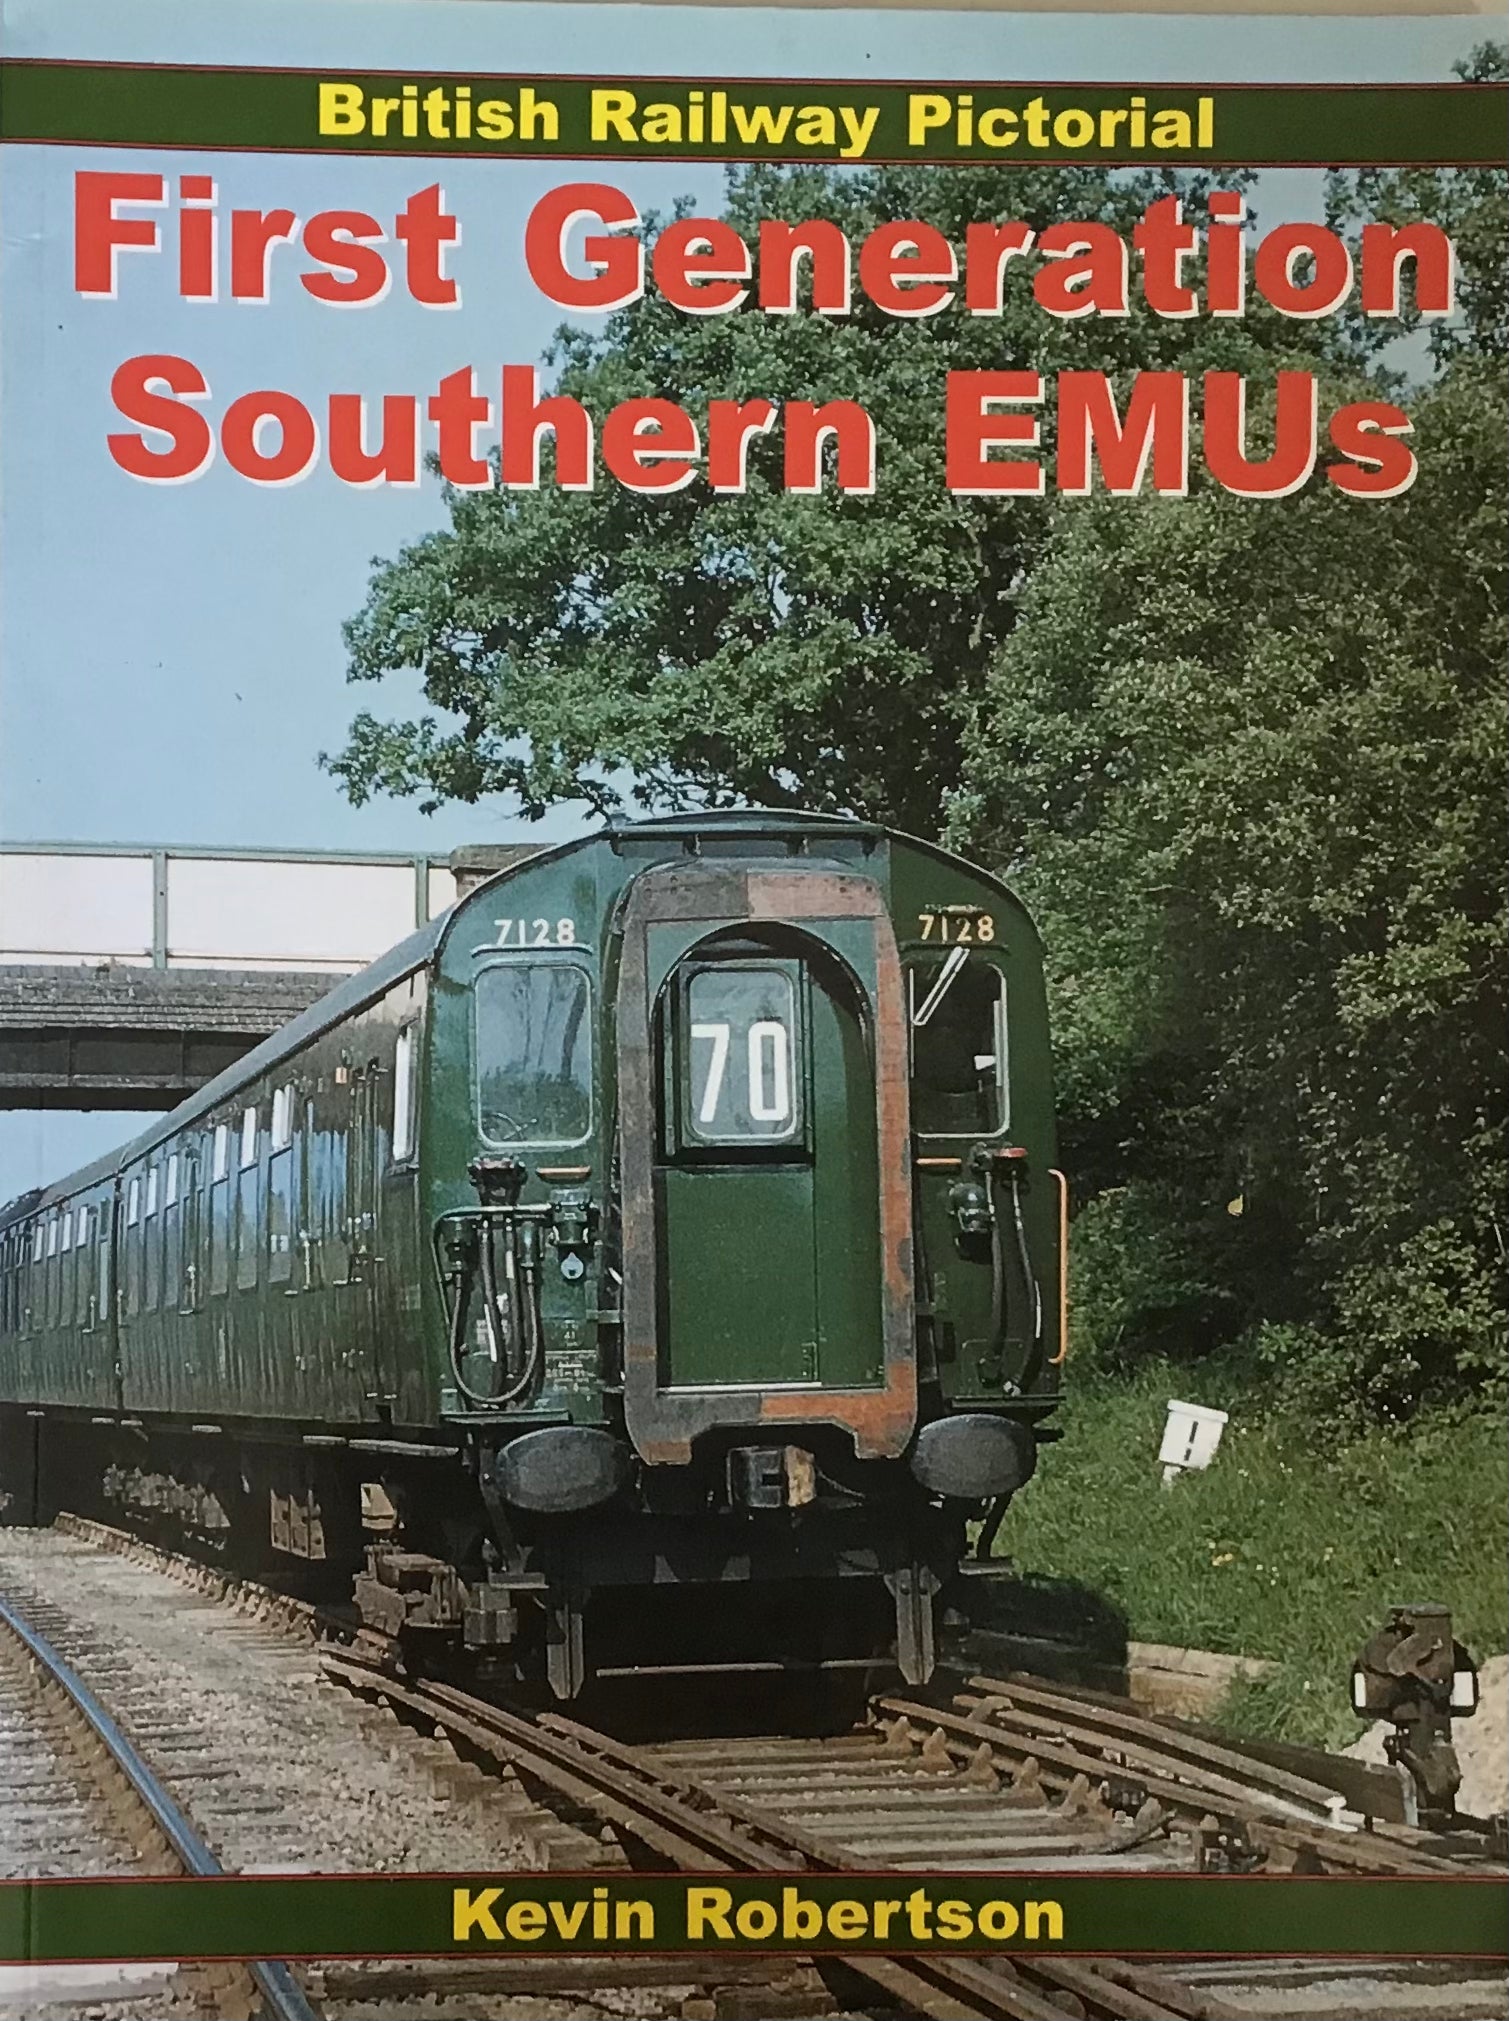 British Railway Pictorial First Generation Southern EMUs - Kevin Robertson - Chester Model Centre